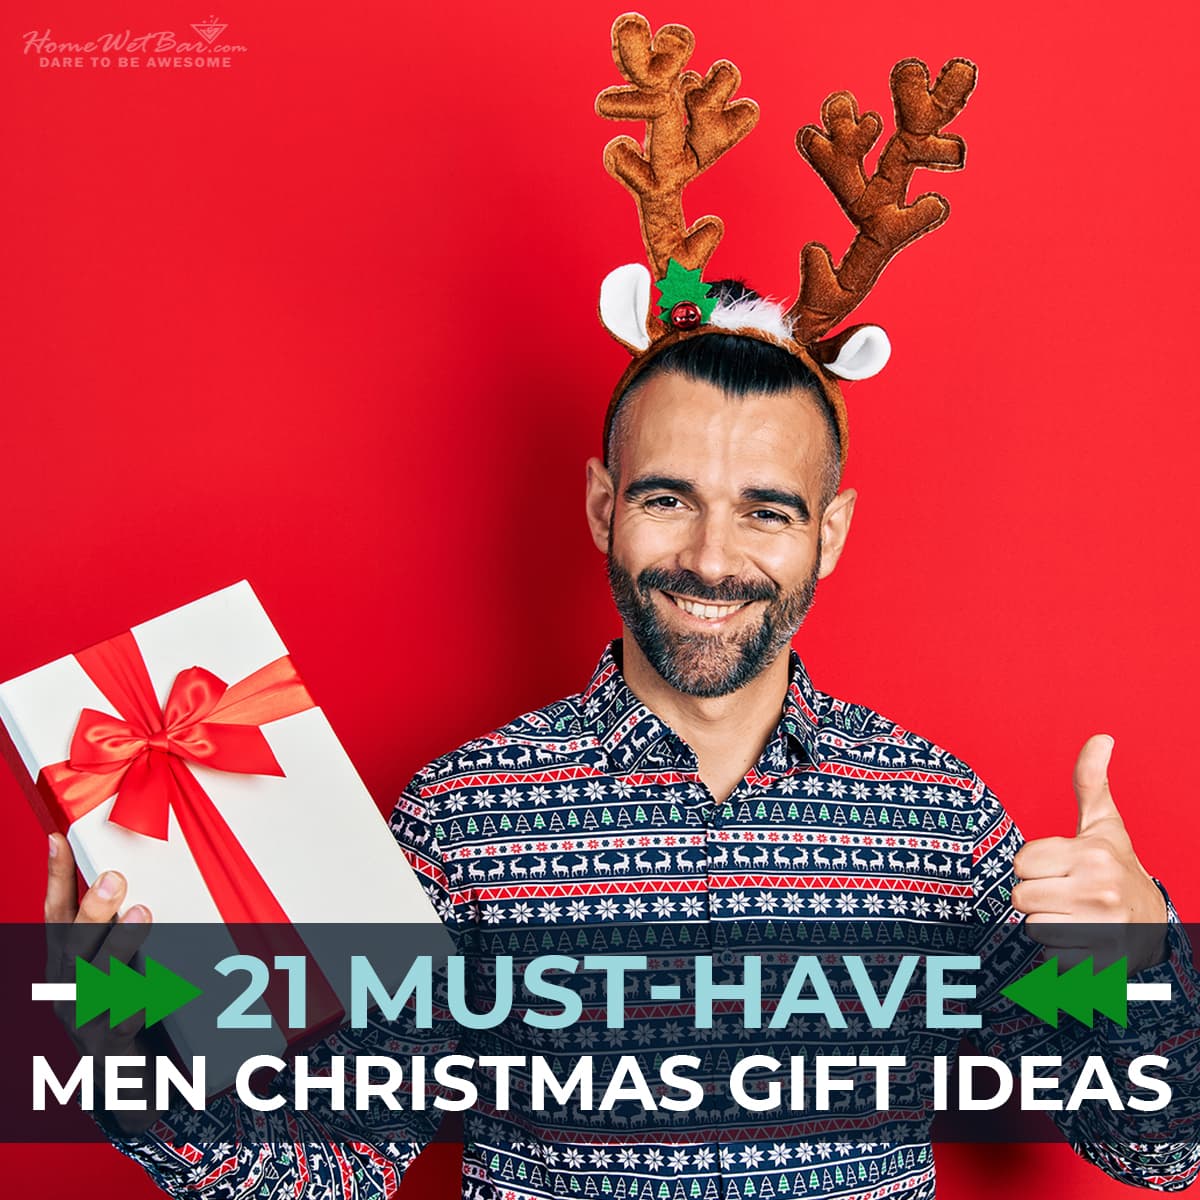 21 Must-Have Men Christmas Gift Ideas